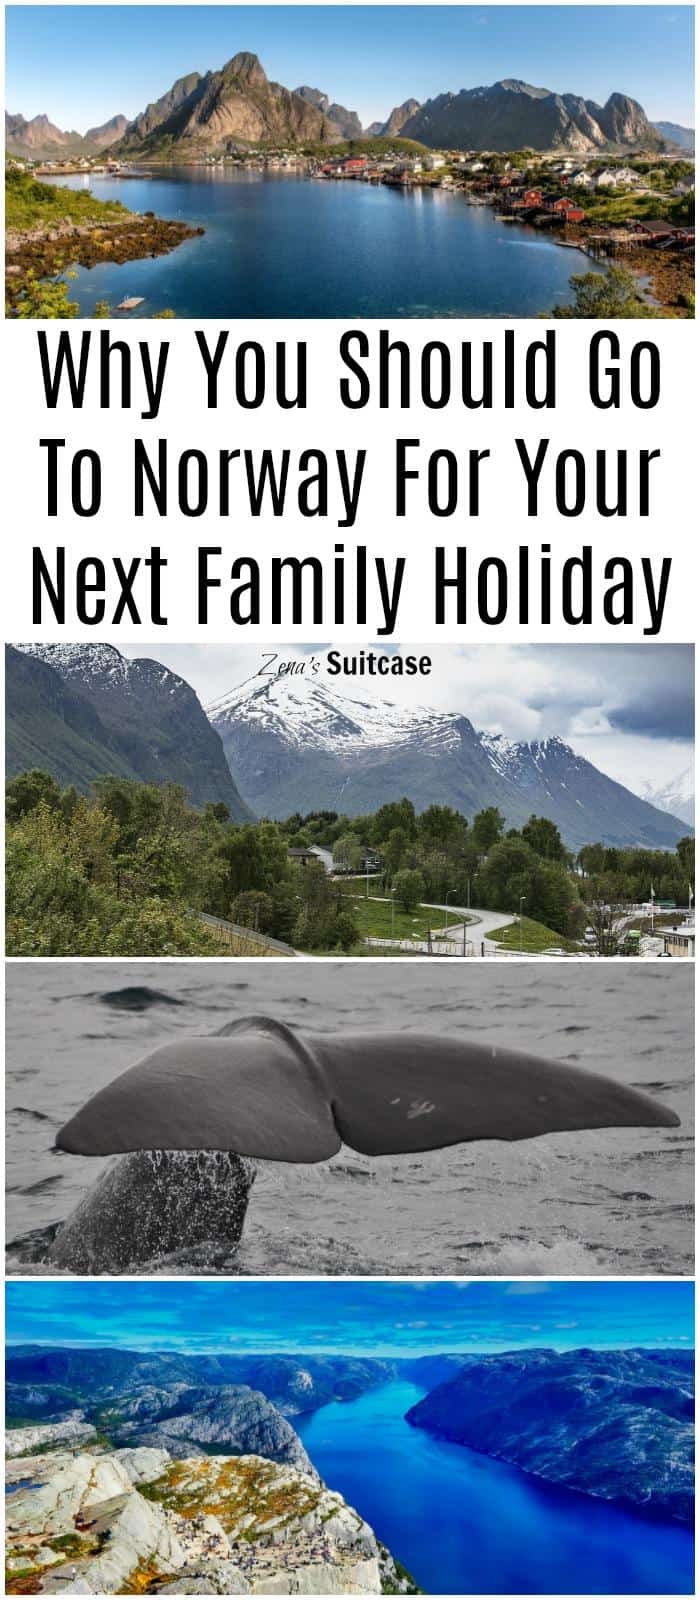 Why You Should Go To Norway For Your Next Family Holiday